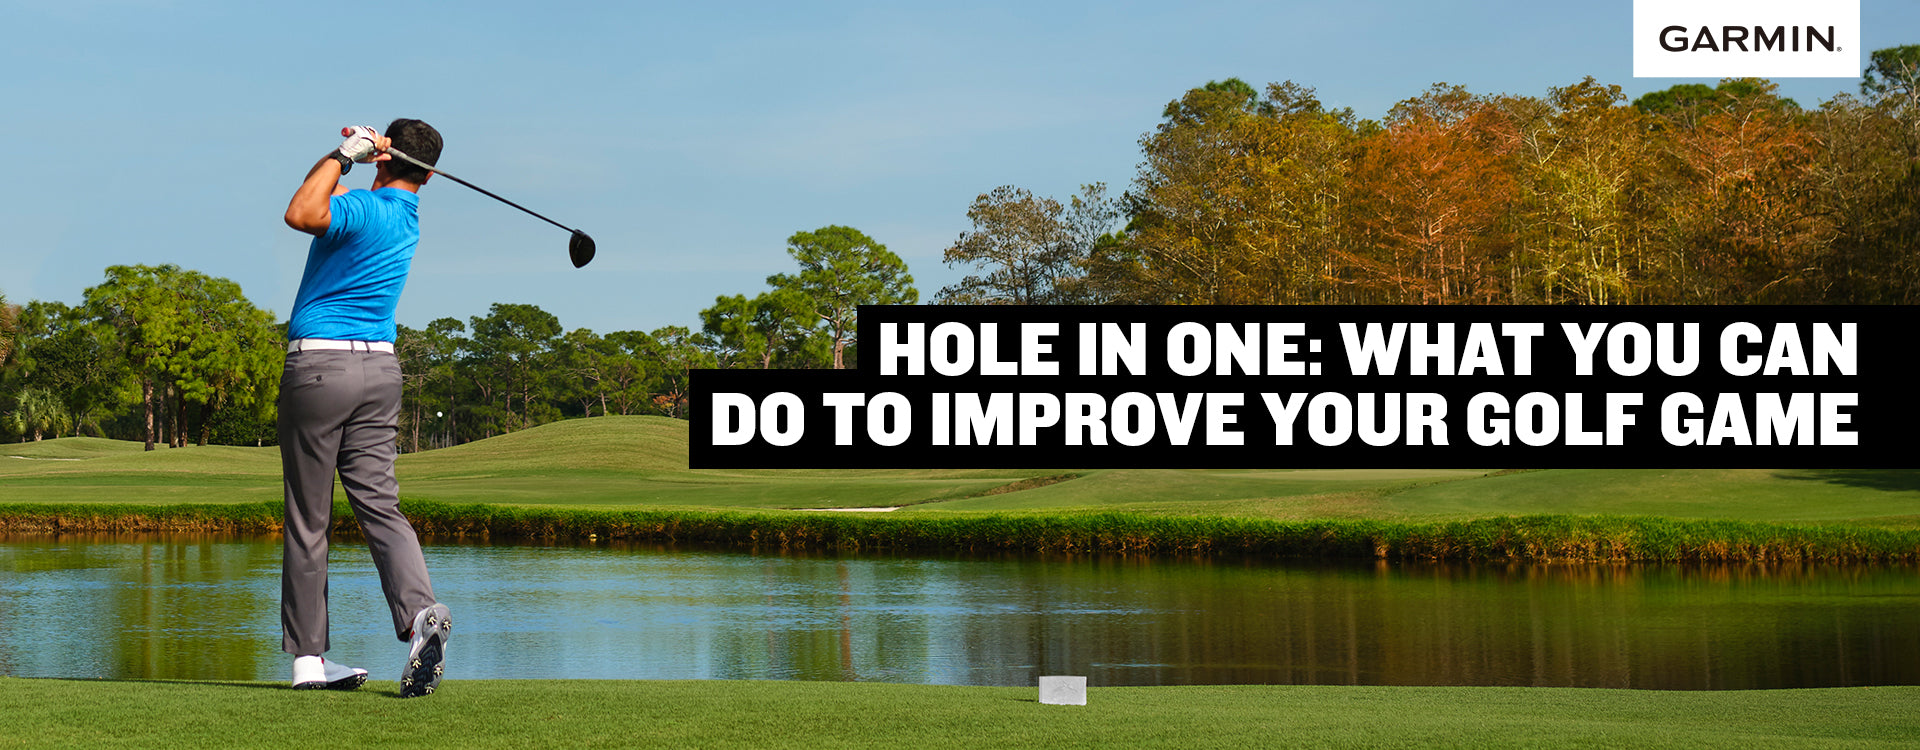 Hole in One: What You Can Do to Improve Your Golf Game